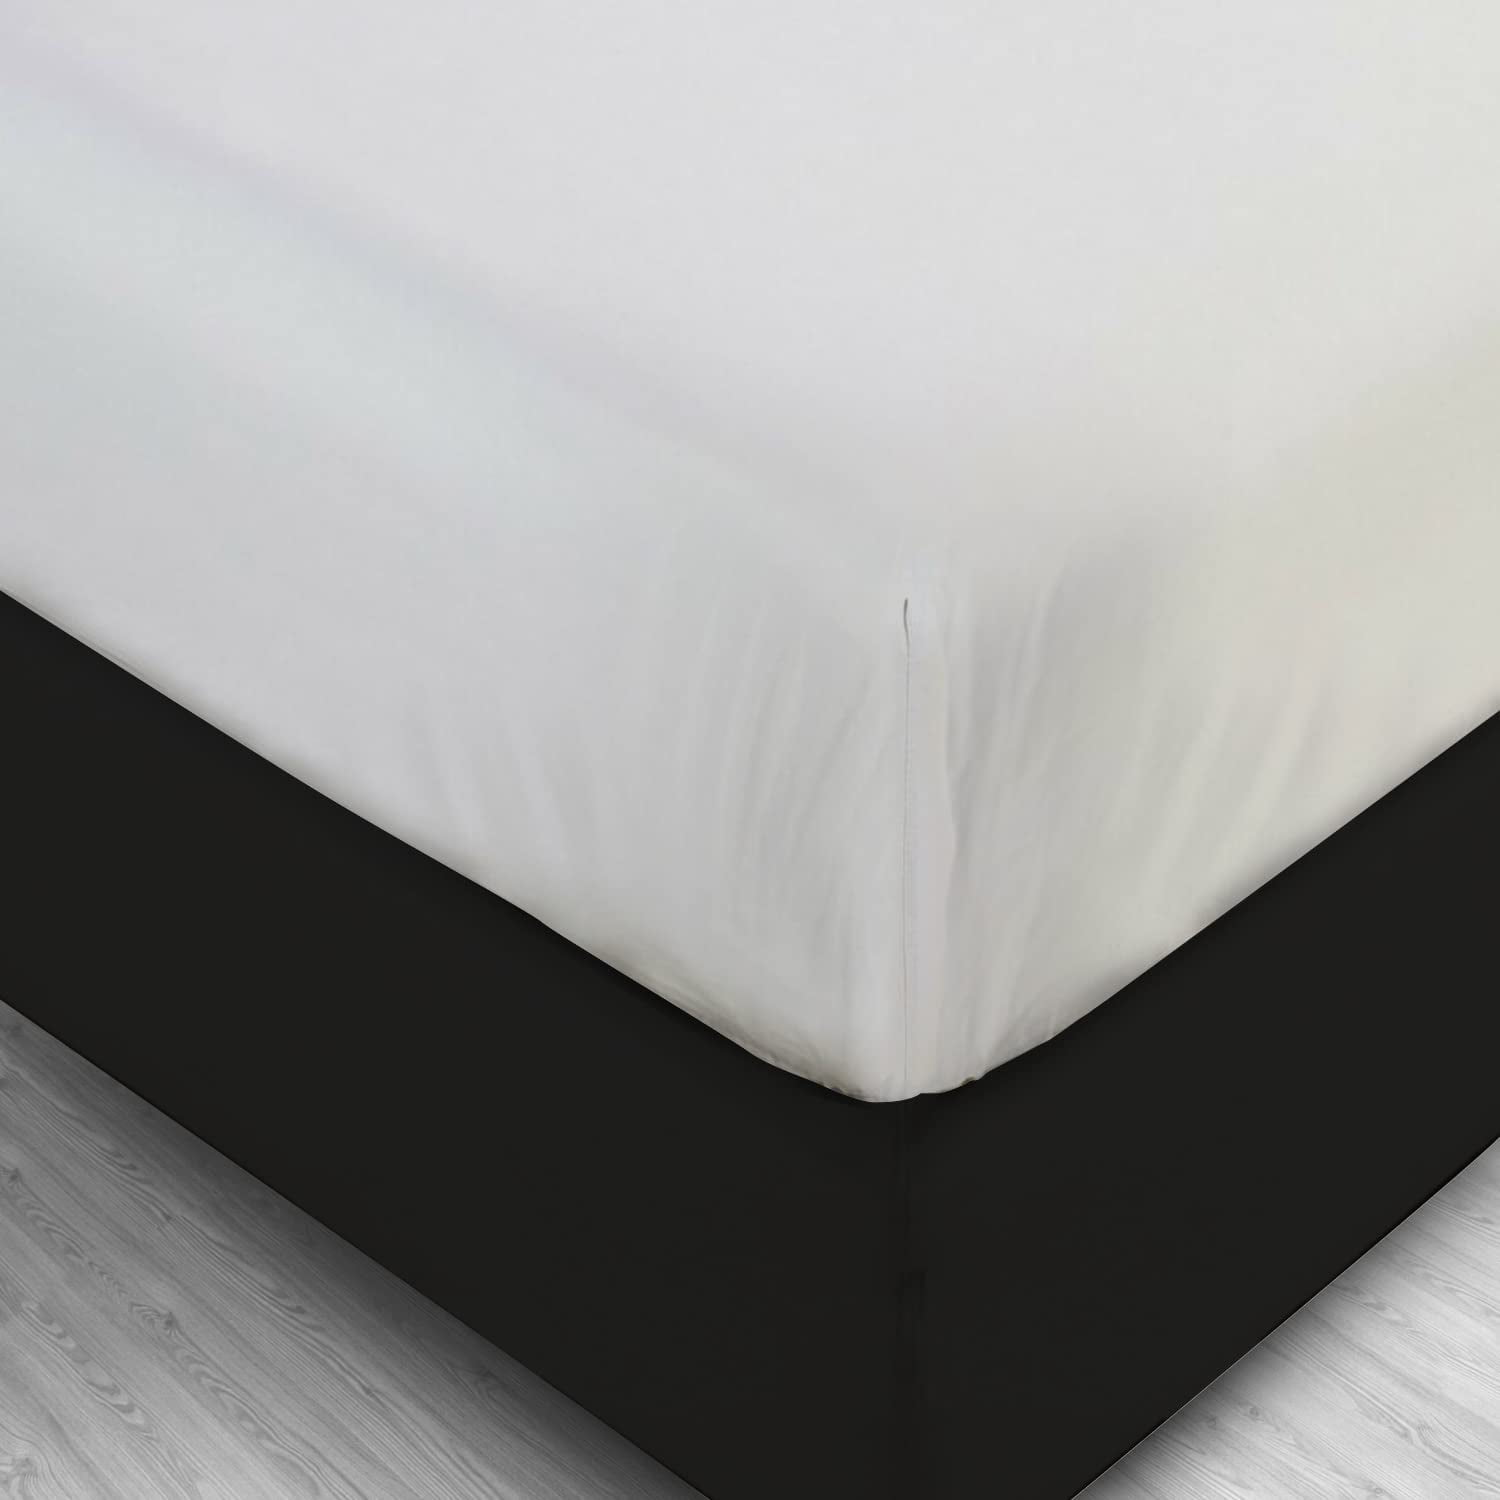 Waterproof Twin mattress protectors Defend A Bed White Fitted New Original Bag 